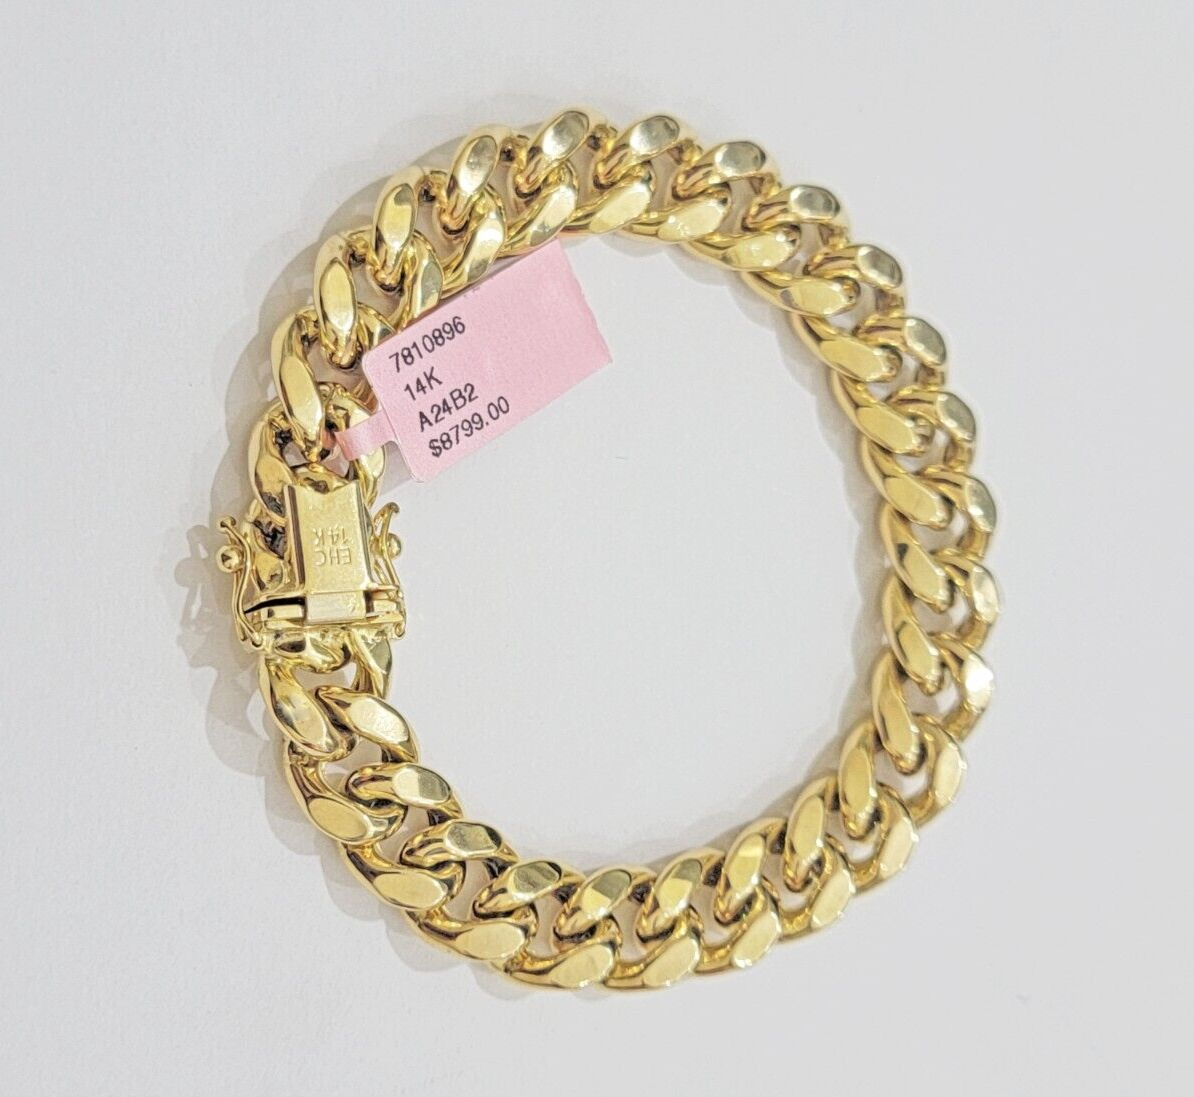 Real 14k Yellow Gold Bracelet 8 Inch Miami Cuban Link Box Clasp For Men's 14KT